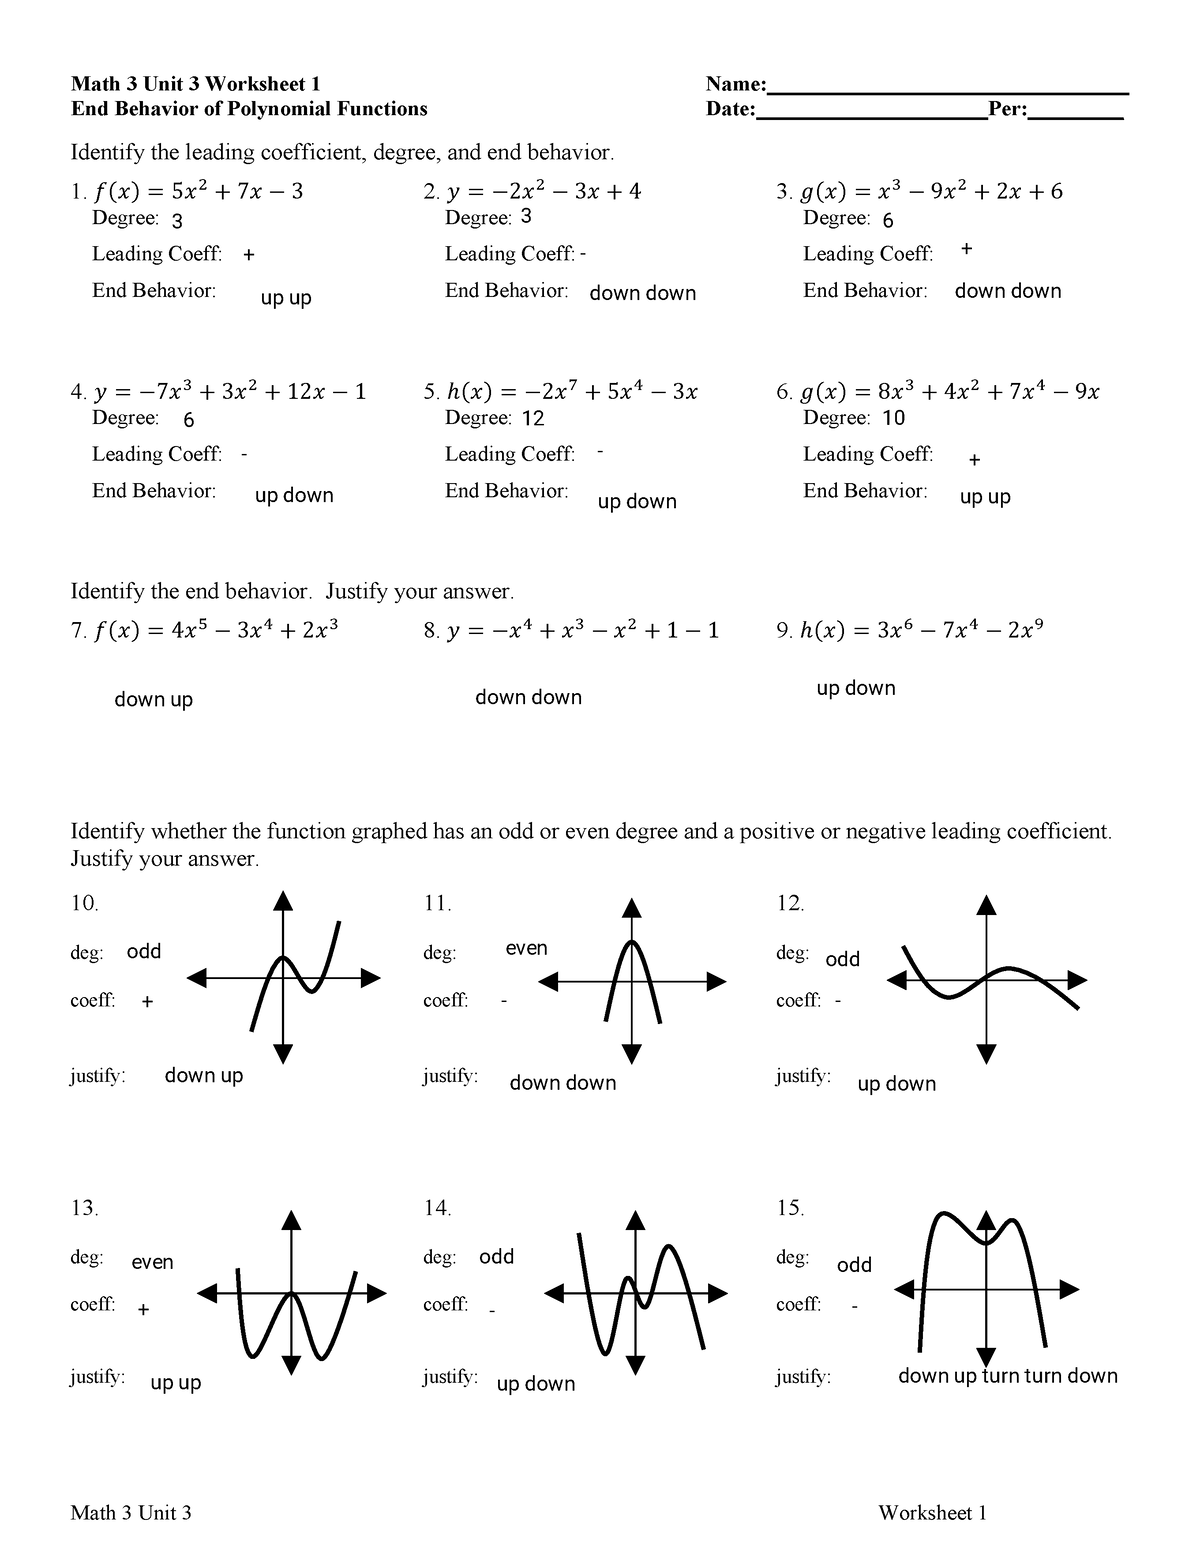 Math 3 Unit 3 Worksheet 1 Answer Key End Behavior Of Polynomial Functions